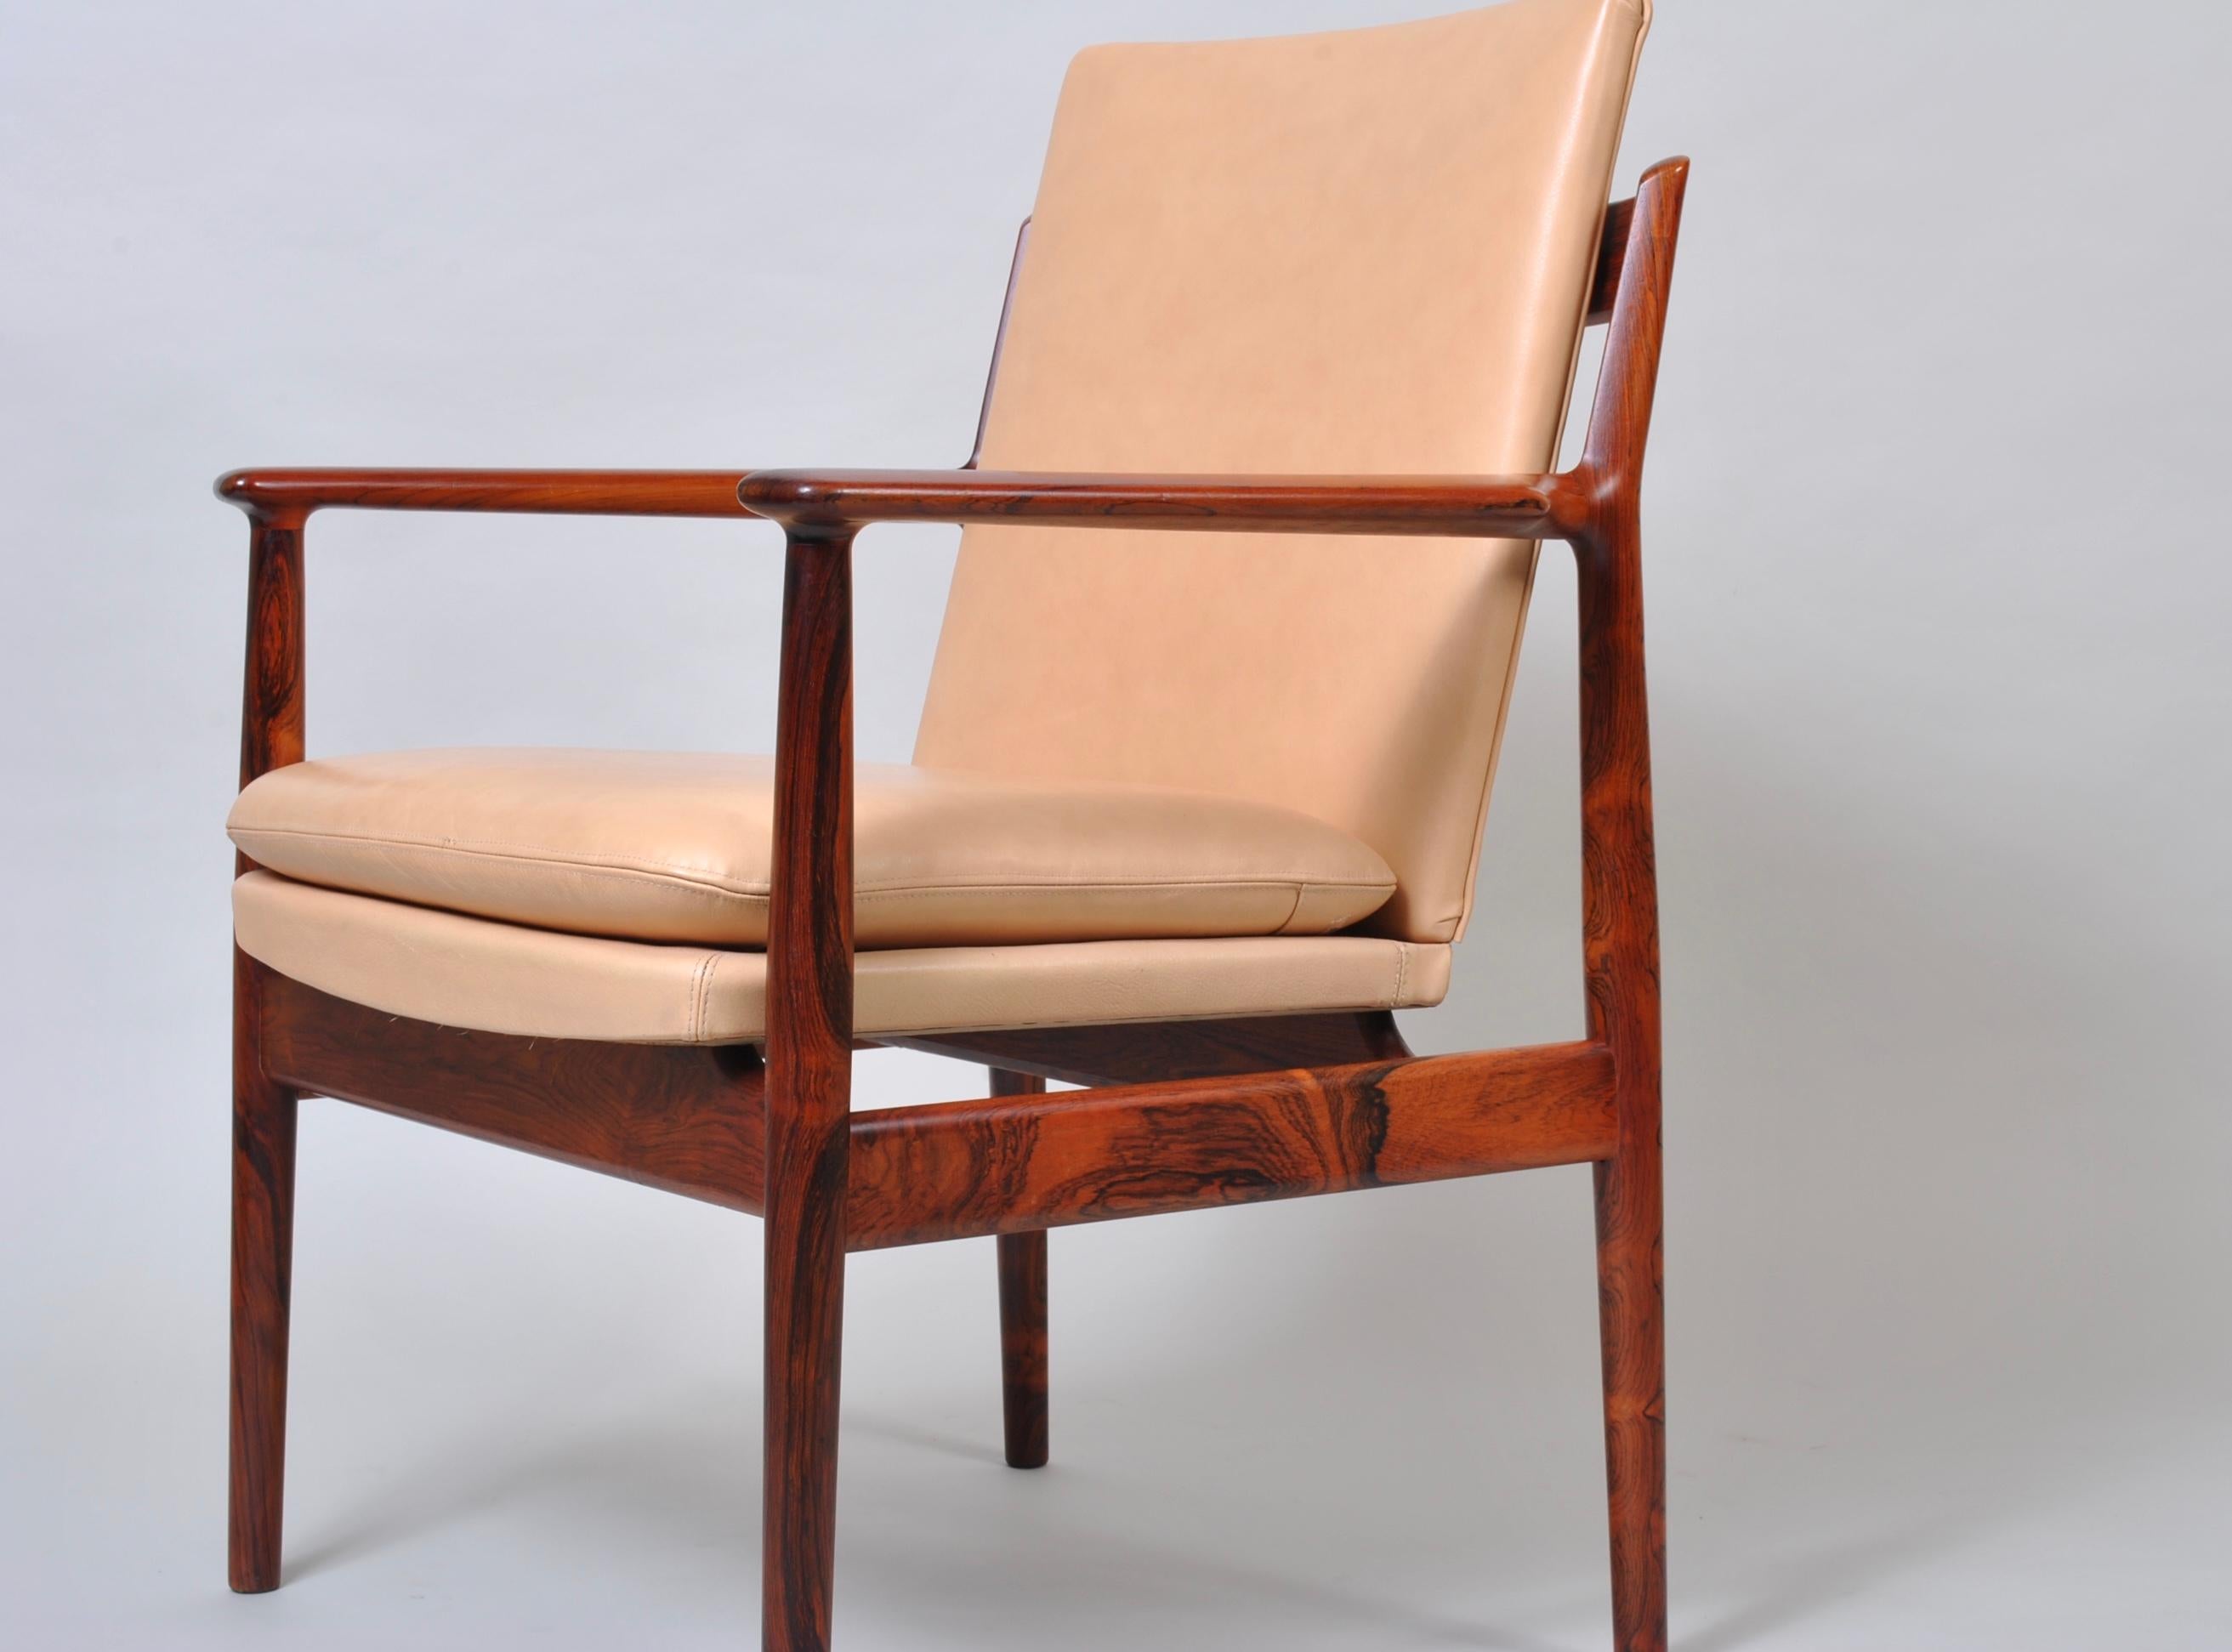 A wonderful Danish midcentury rosewood and leather armchair by Arne Vodder. Extremely nice rosewood frame with some very interesting grain and coloring. A classic design by Arne Vodder for the Sibast Furniture company. Very comfortable chairs.